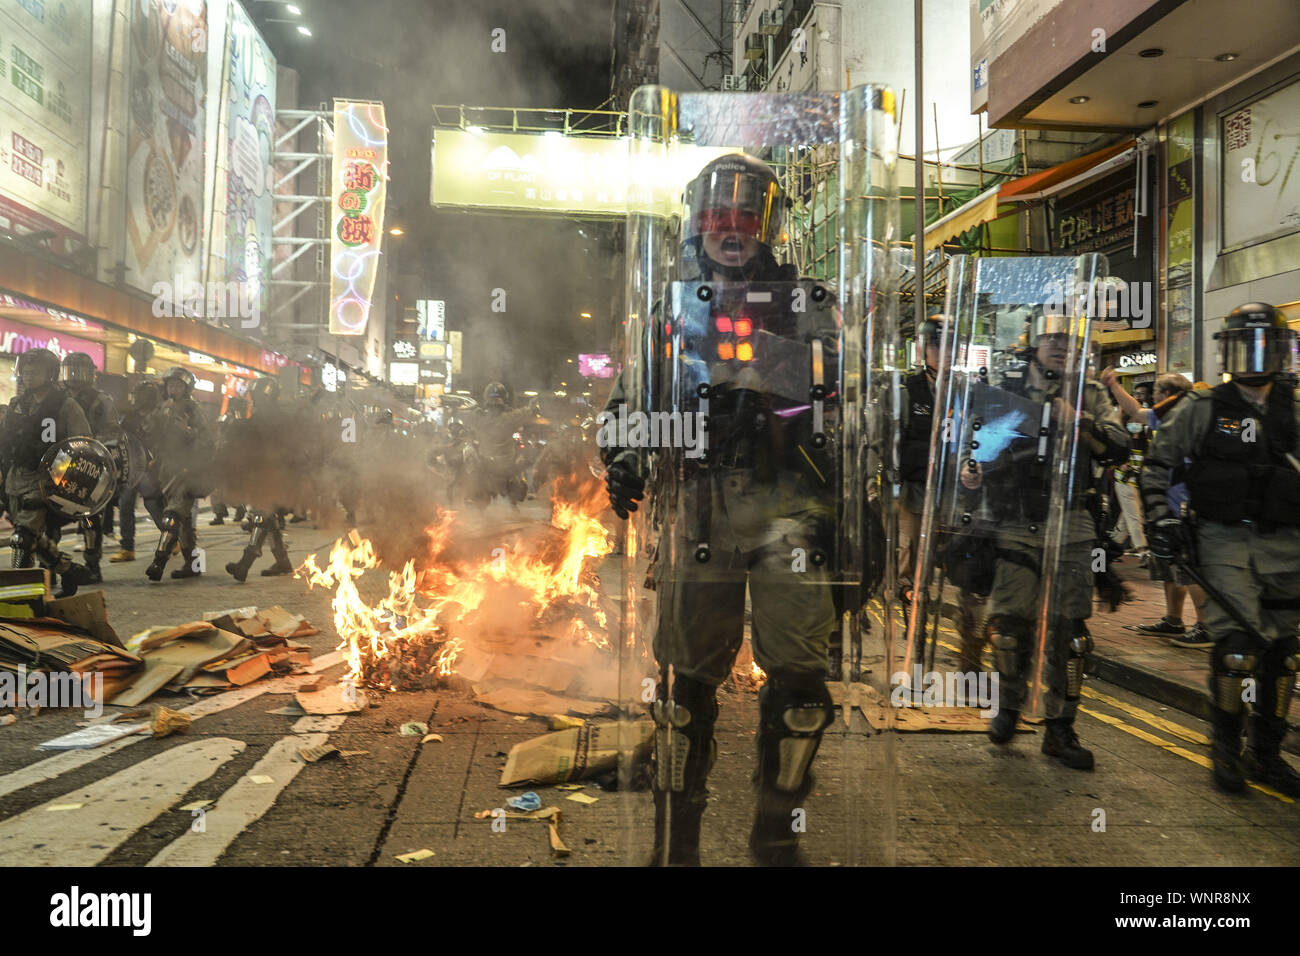 Kowloon, Hong Kong. 6th Sep, 2019. Riot police officers surround garbage fire which was set by protestors on Friday September 6, 2019.in Mong Kok Town Kowloon, Hong Kong.Thousands of protestors gathered outside of Mong Kok police station and around that area to protest the police violence against citizens of Hong Kong.Protesters Moved Nathan Rd to south, destroying surveillance cameras, street signs, building barricades with wooden panes and garbages then set on fire as they move on.9/6/2019.Kowloon, Hong Kong. Credit: ZUMA Press, Inc./Alamy Live News Stock Photo